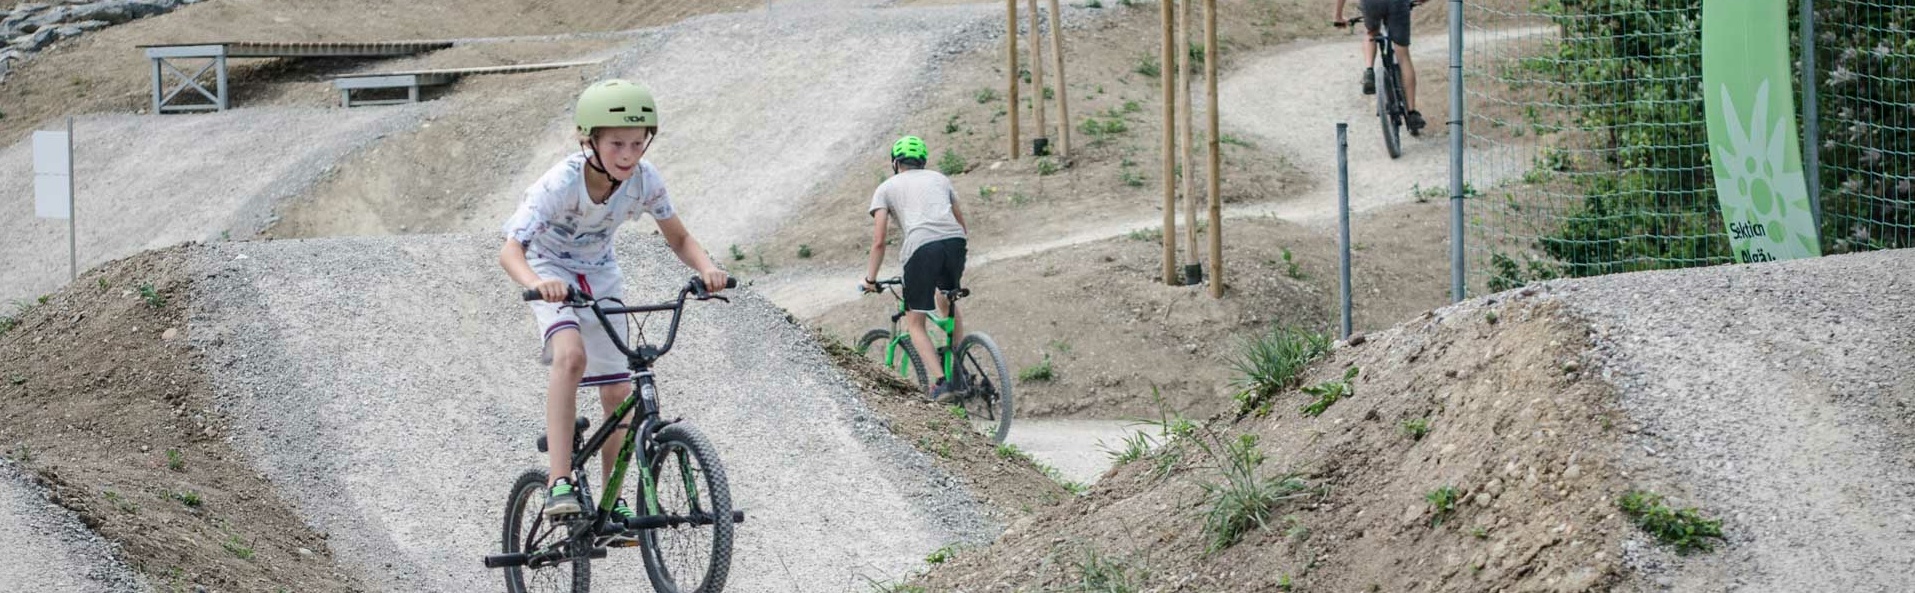 Child rides on unpaved practice course